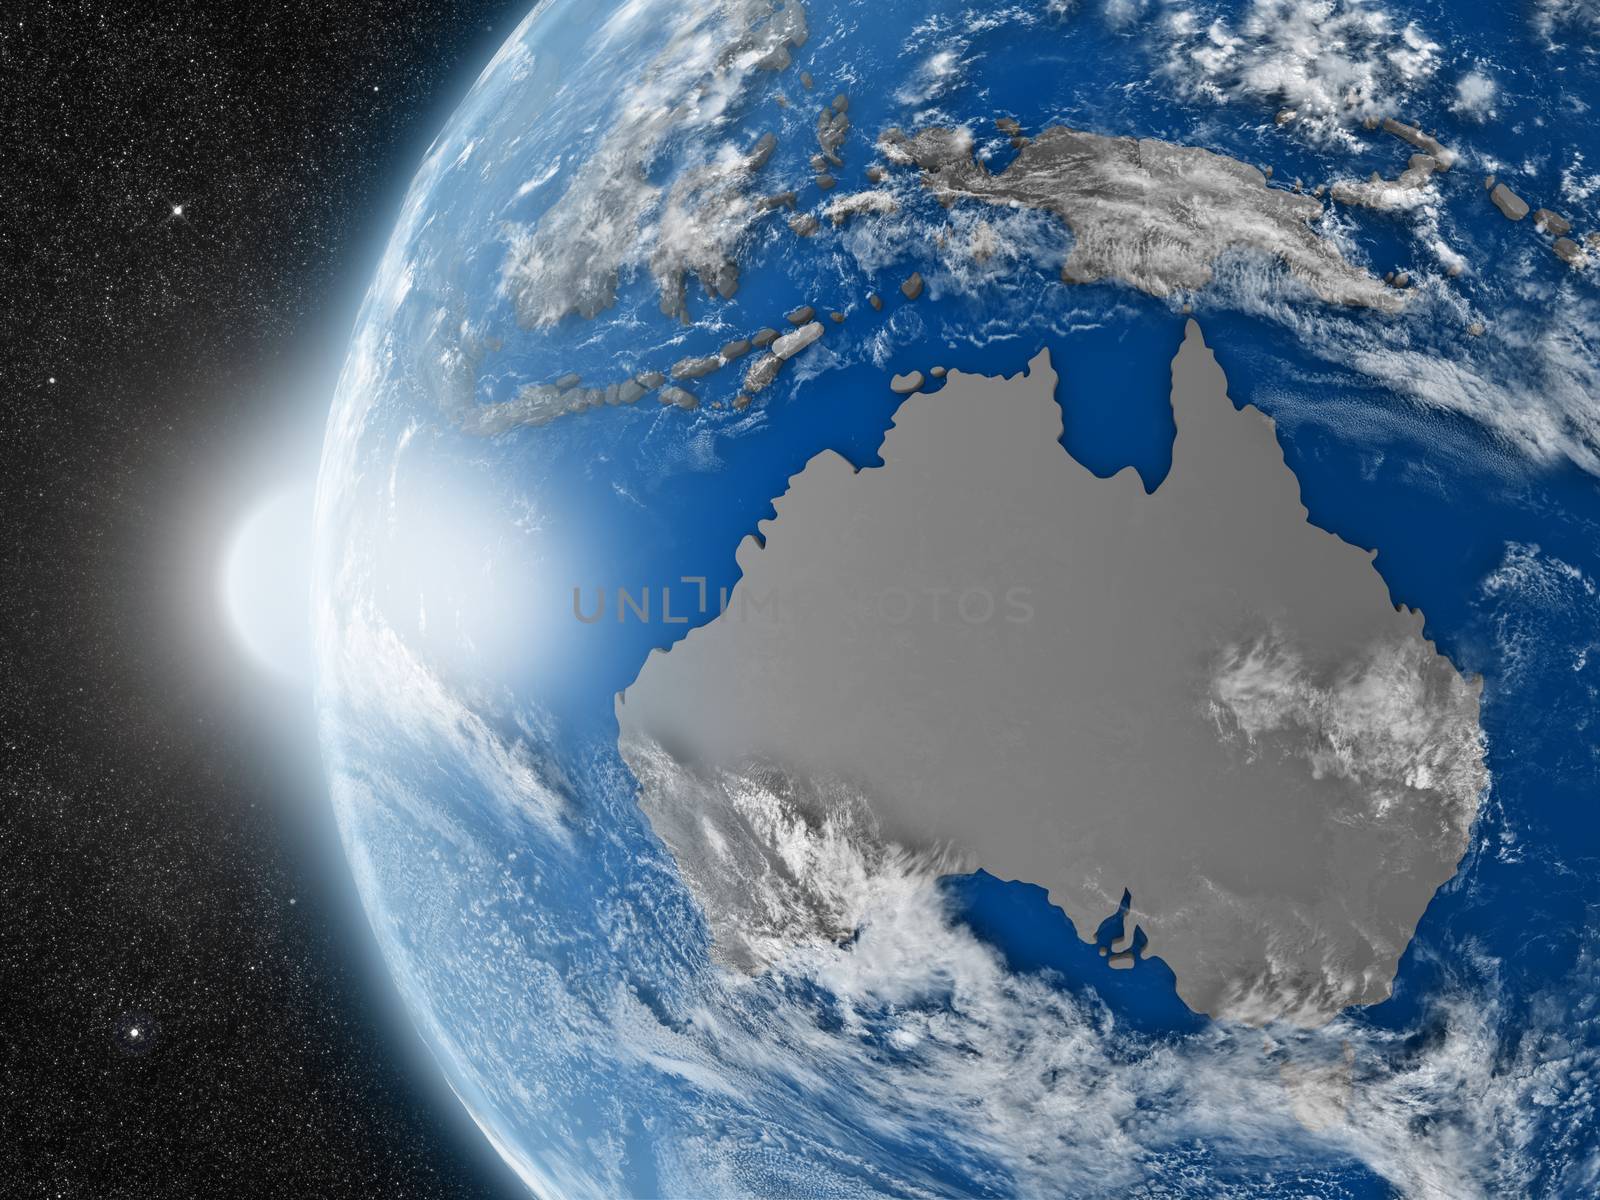 Australian continent from space by Harvepino